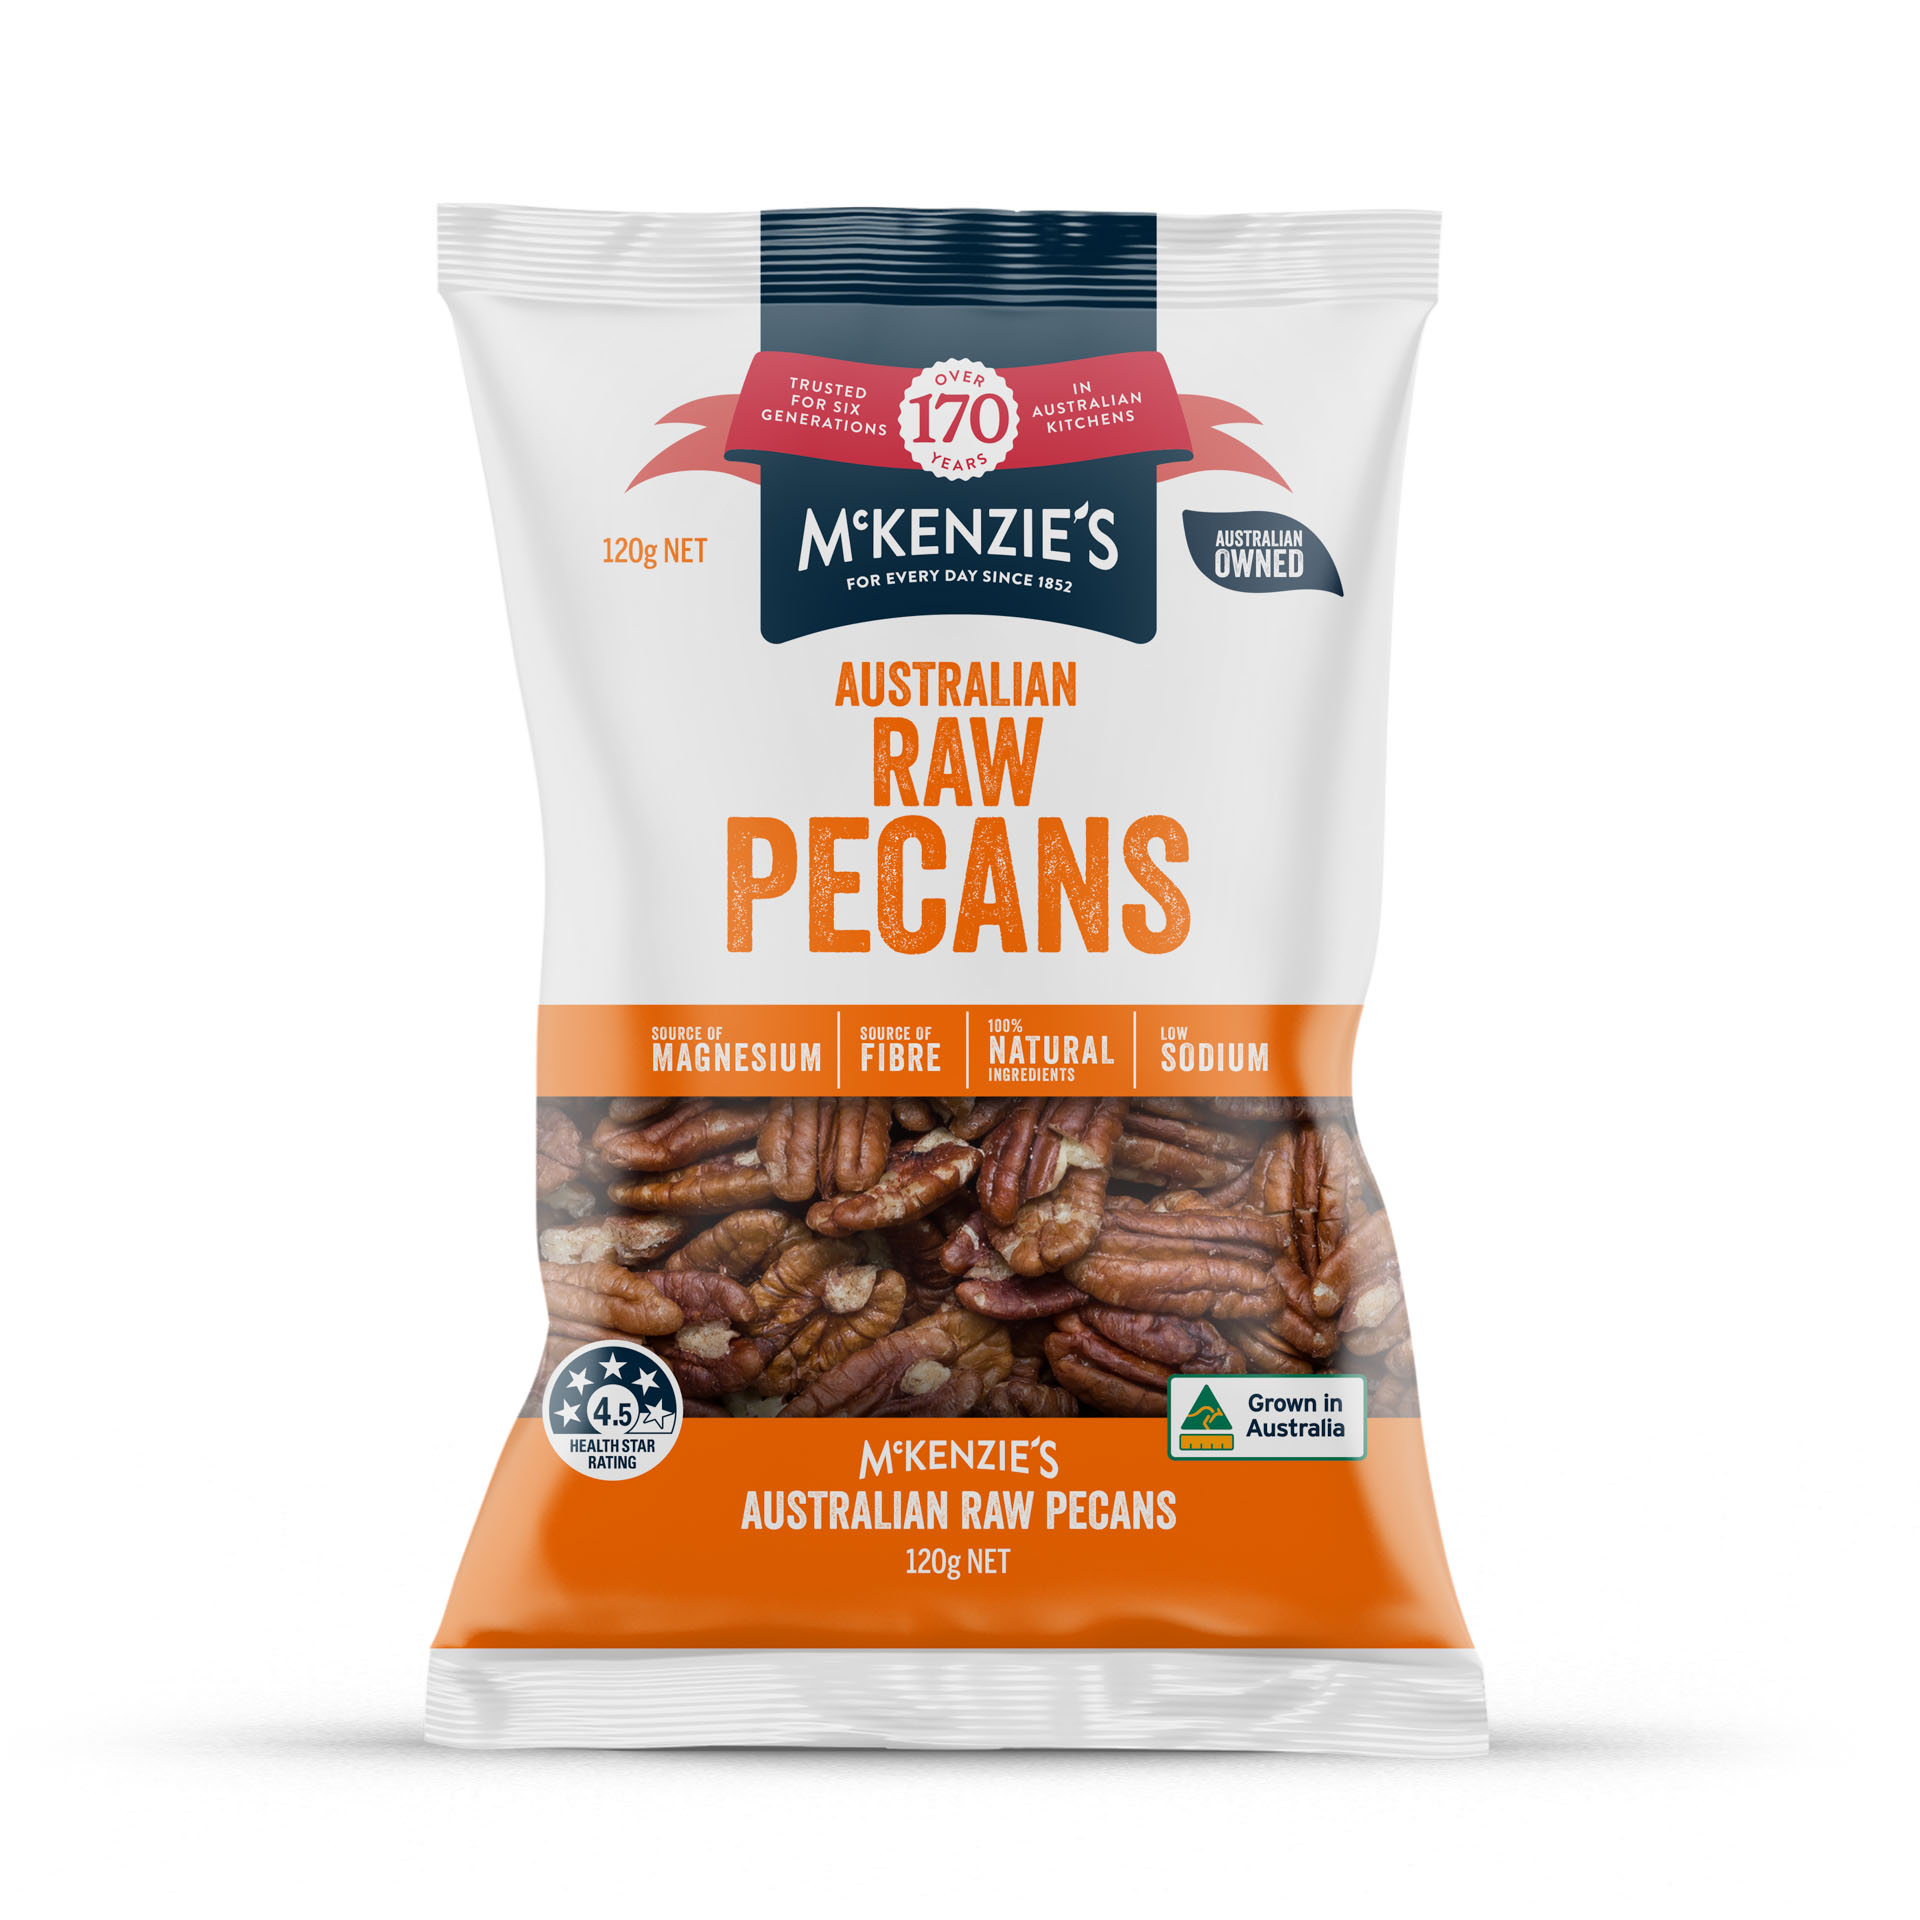 Product photo of Raw Pecans